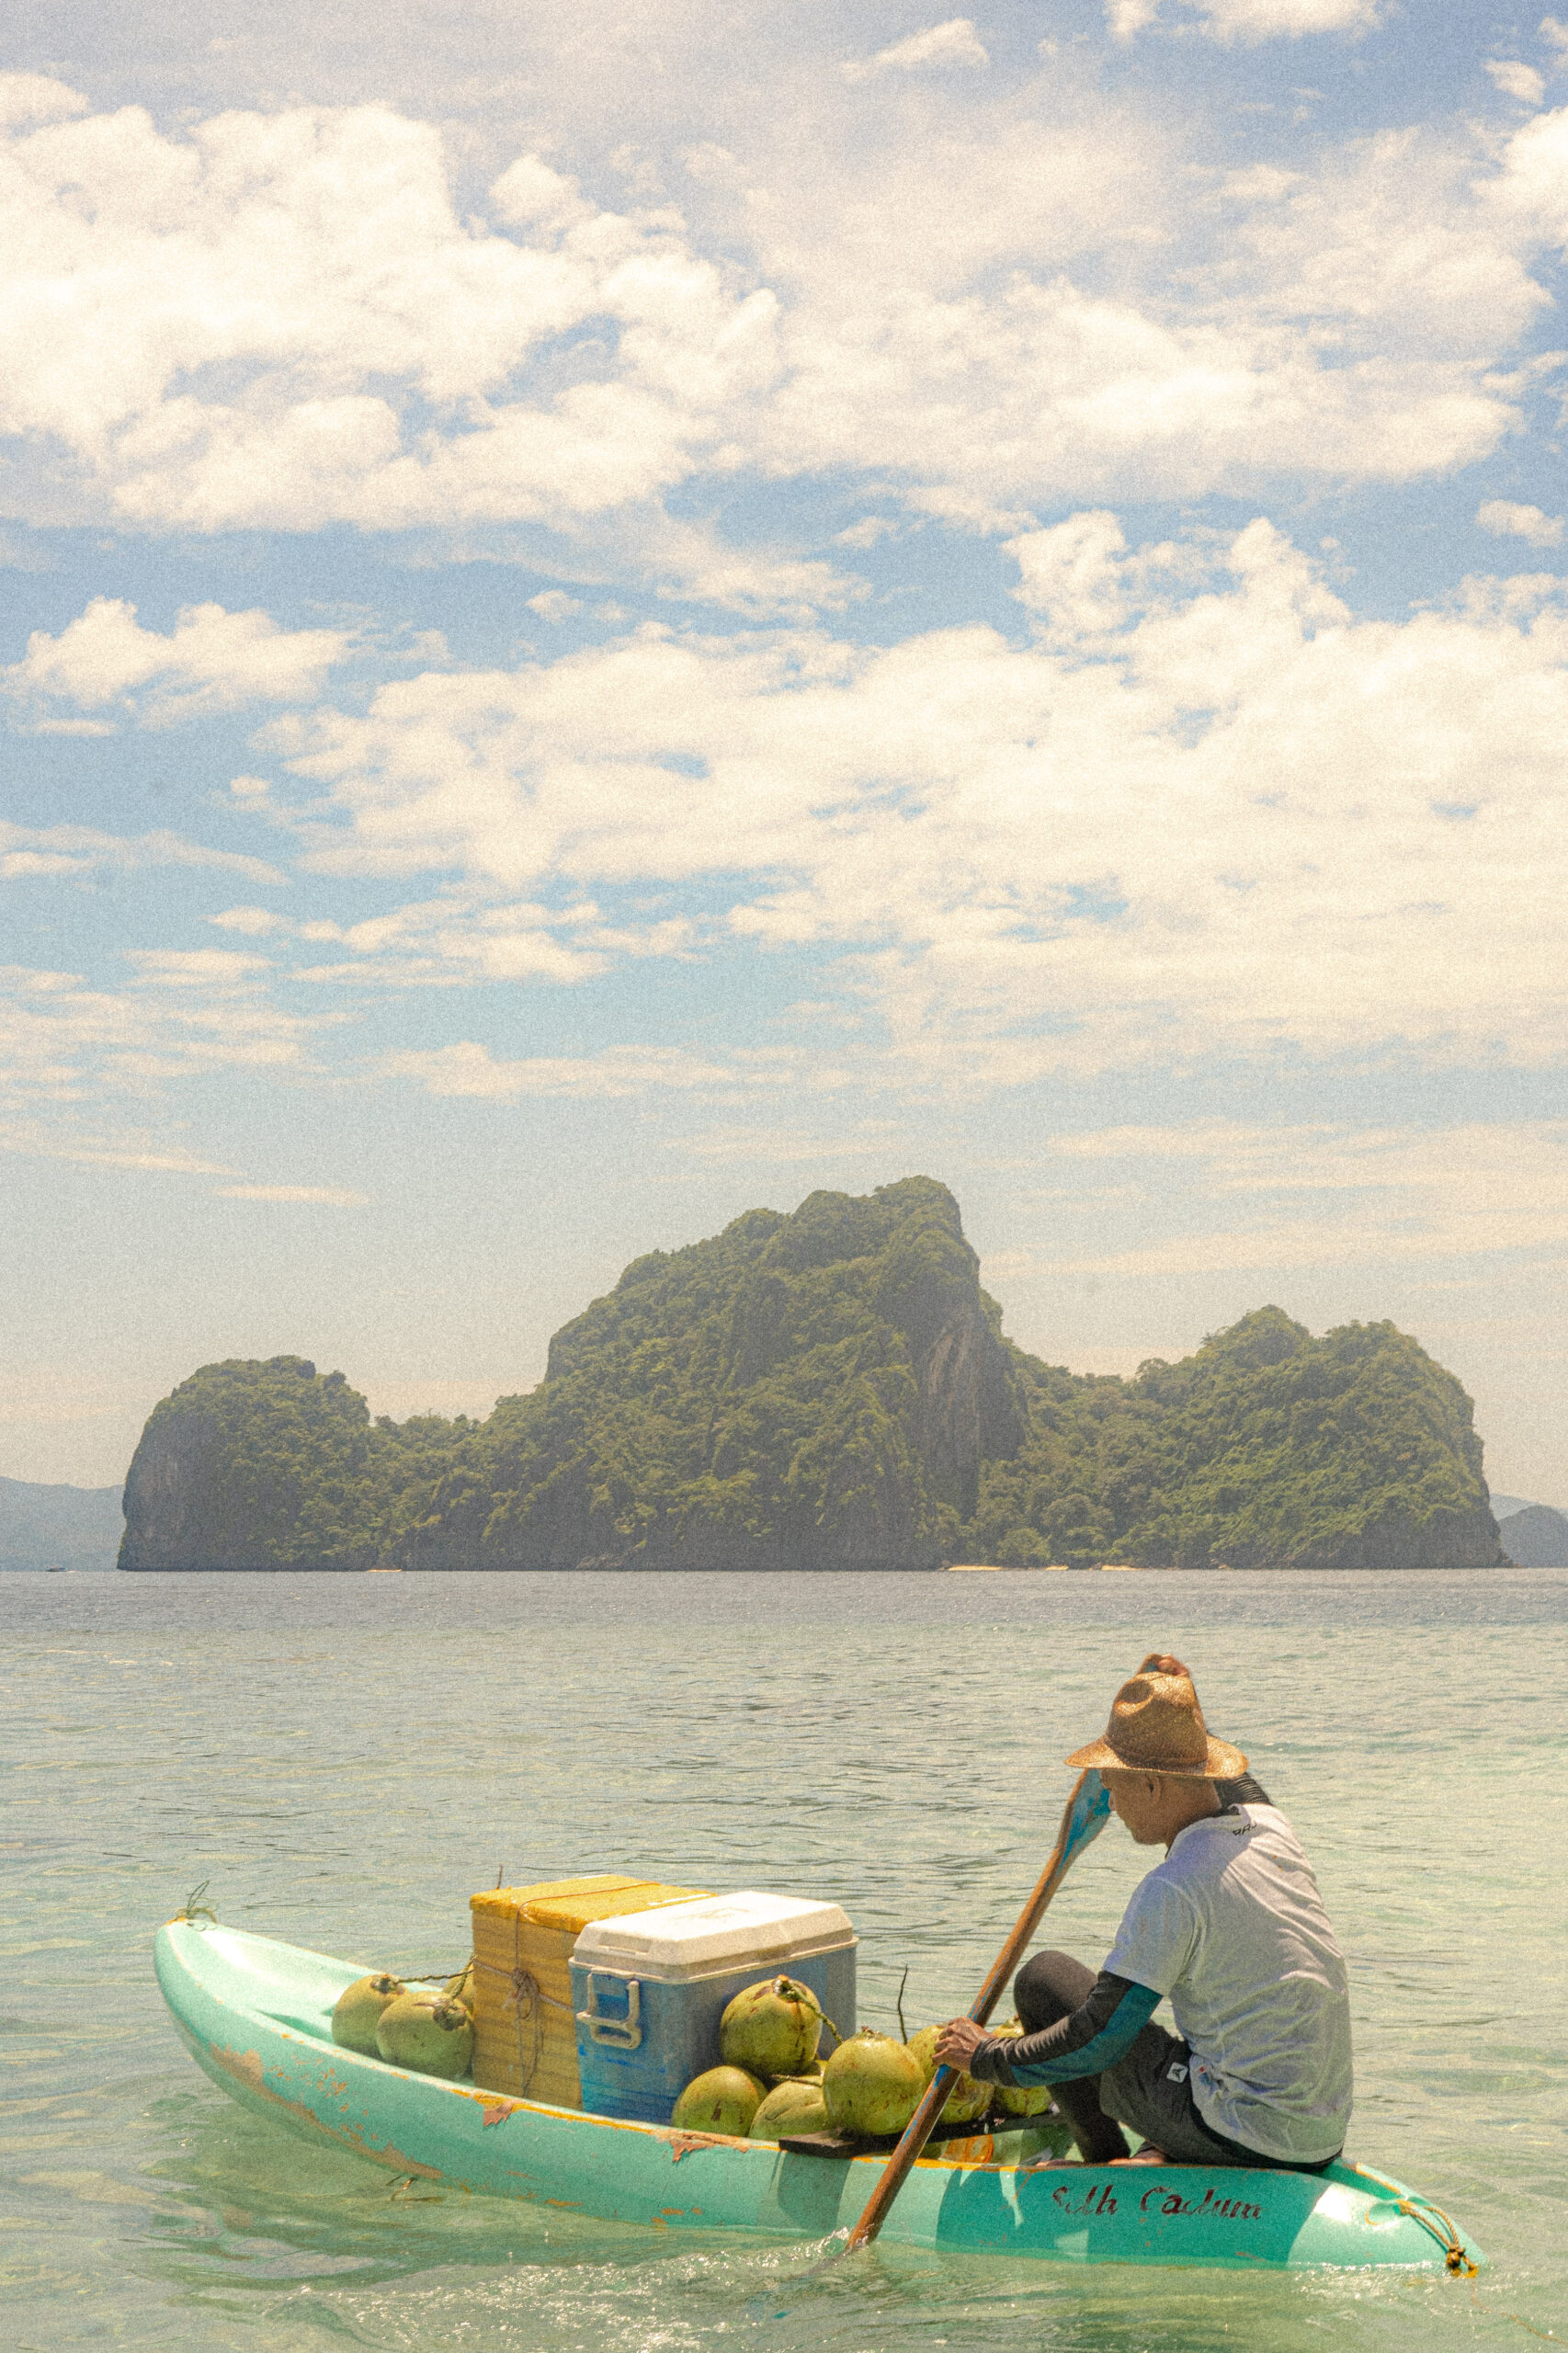 A boat-riding vendor selling coconuts and other beverages | Photo courtesy of JT Fernandez